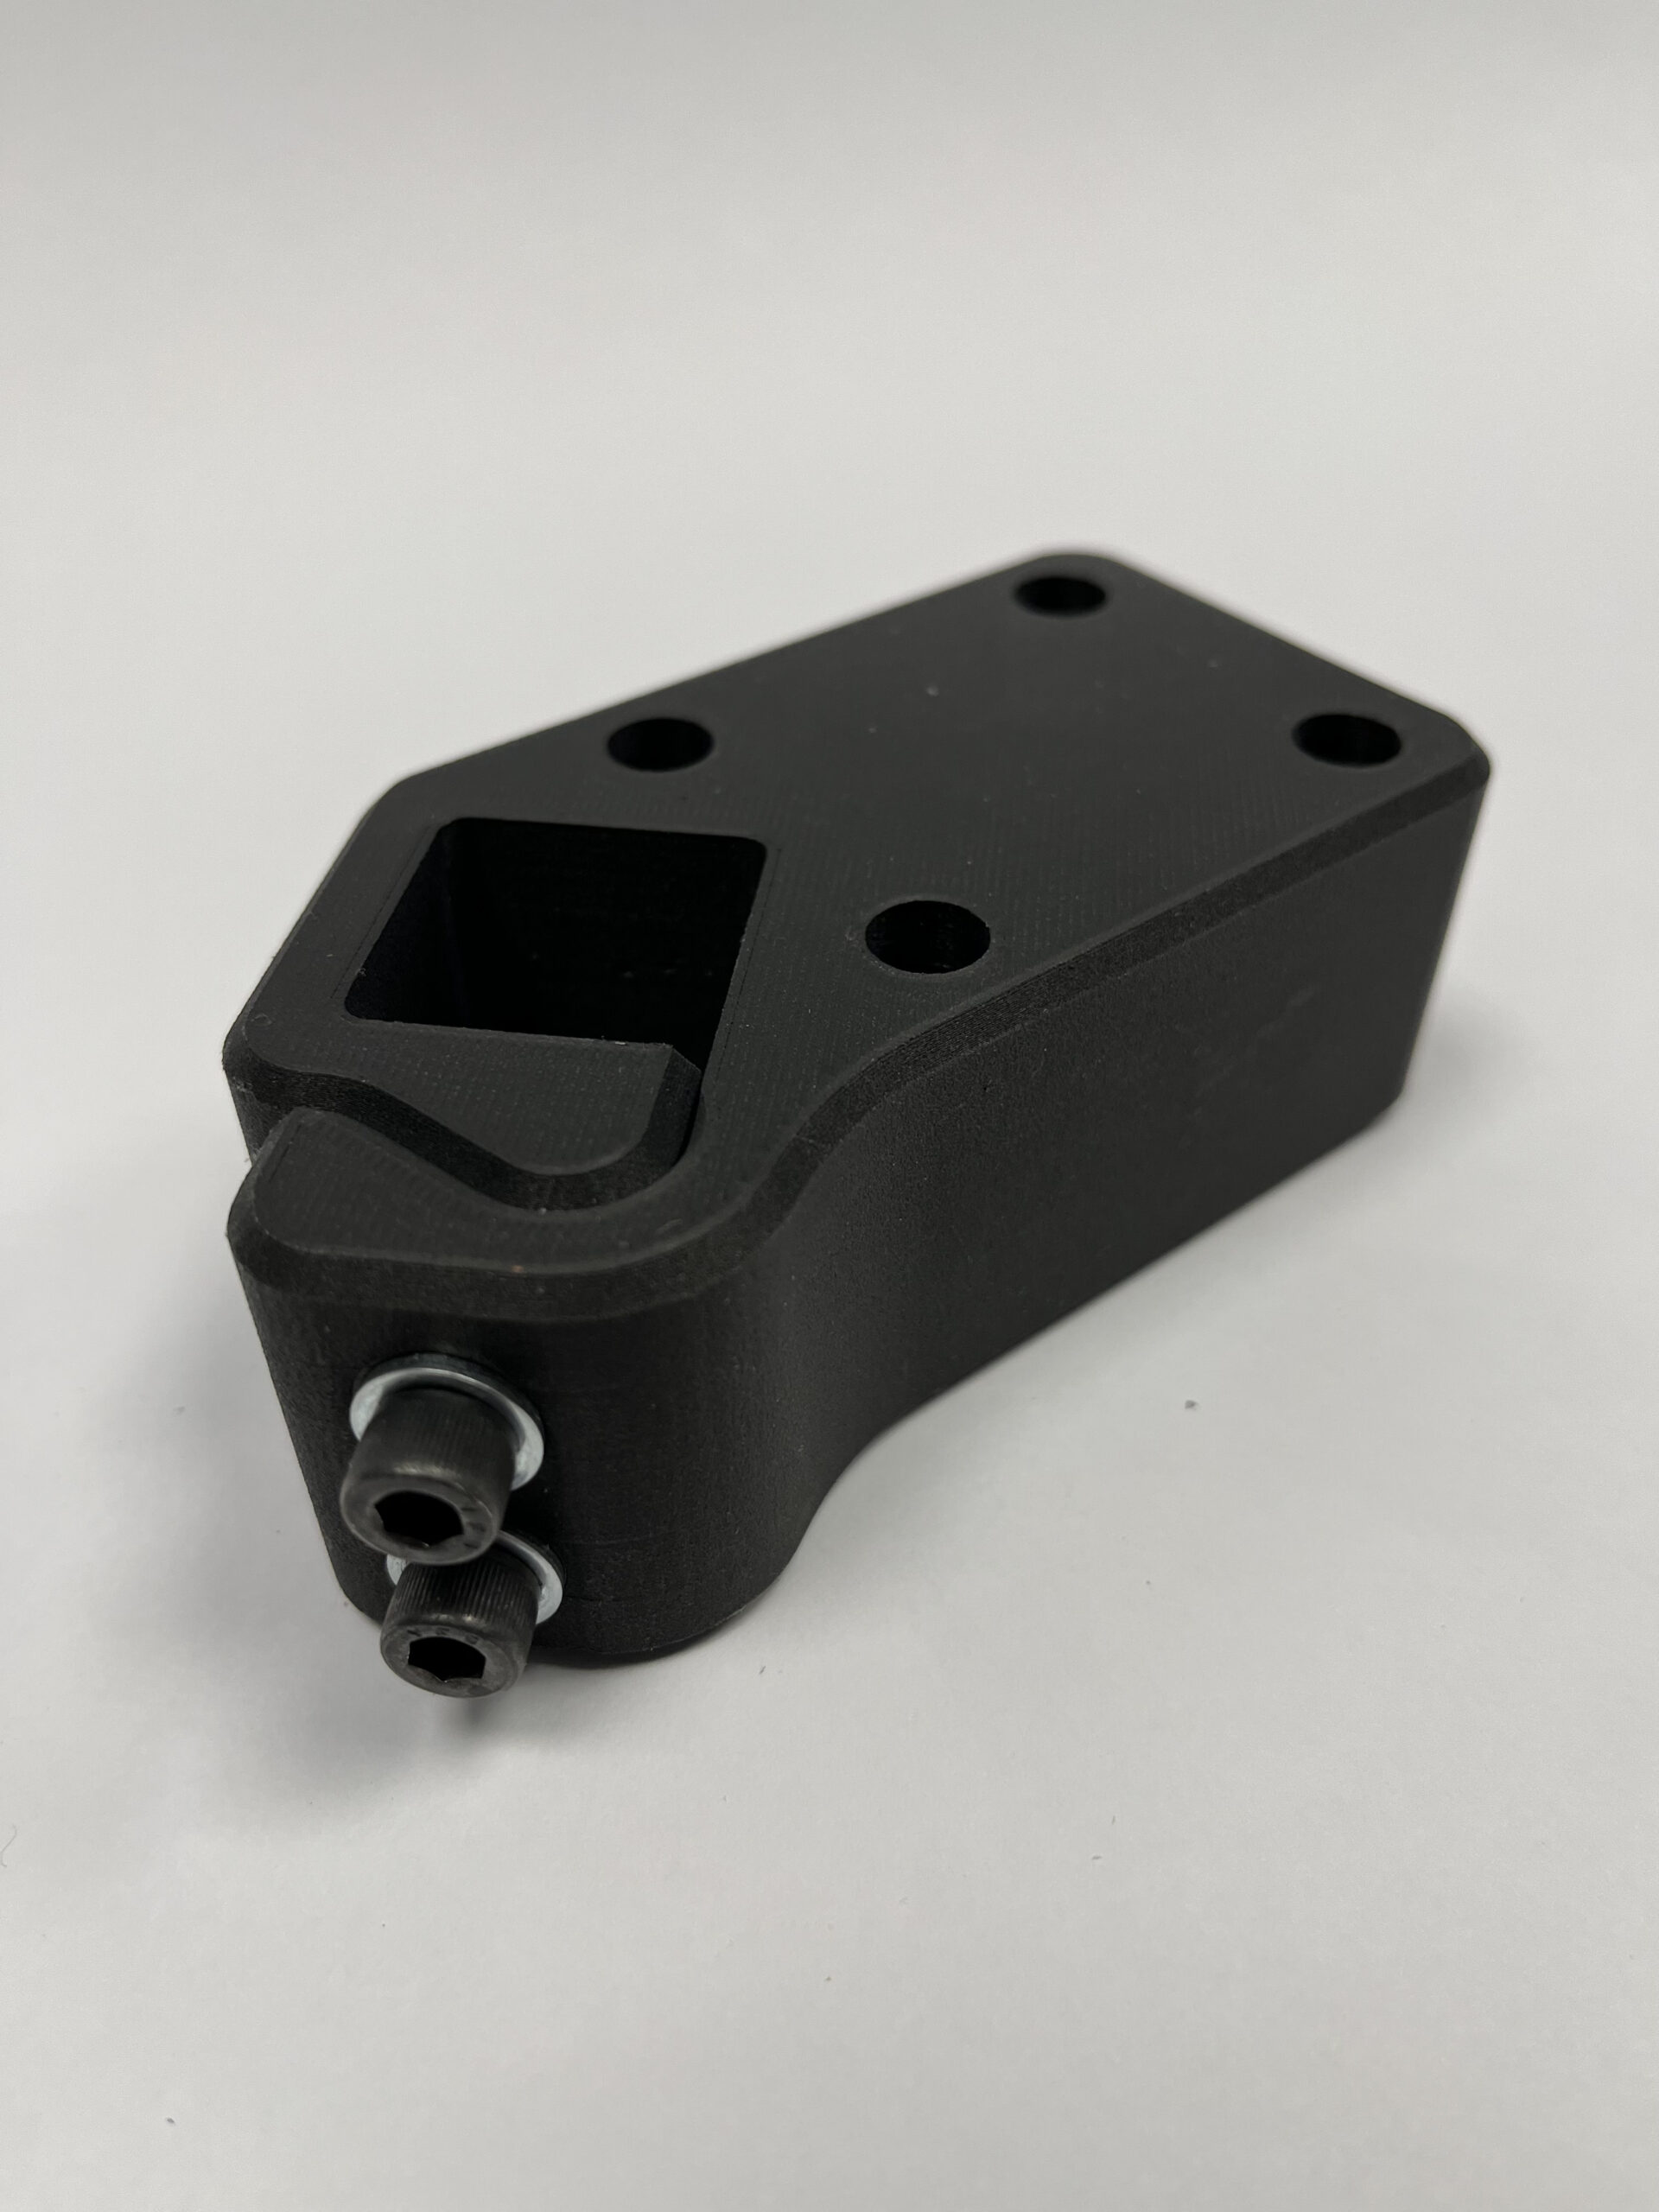 a 3D printed square black composite with 4 circles on top and to knobs on the side.